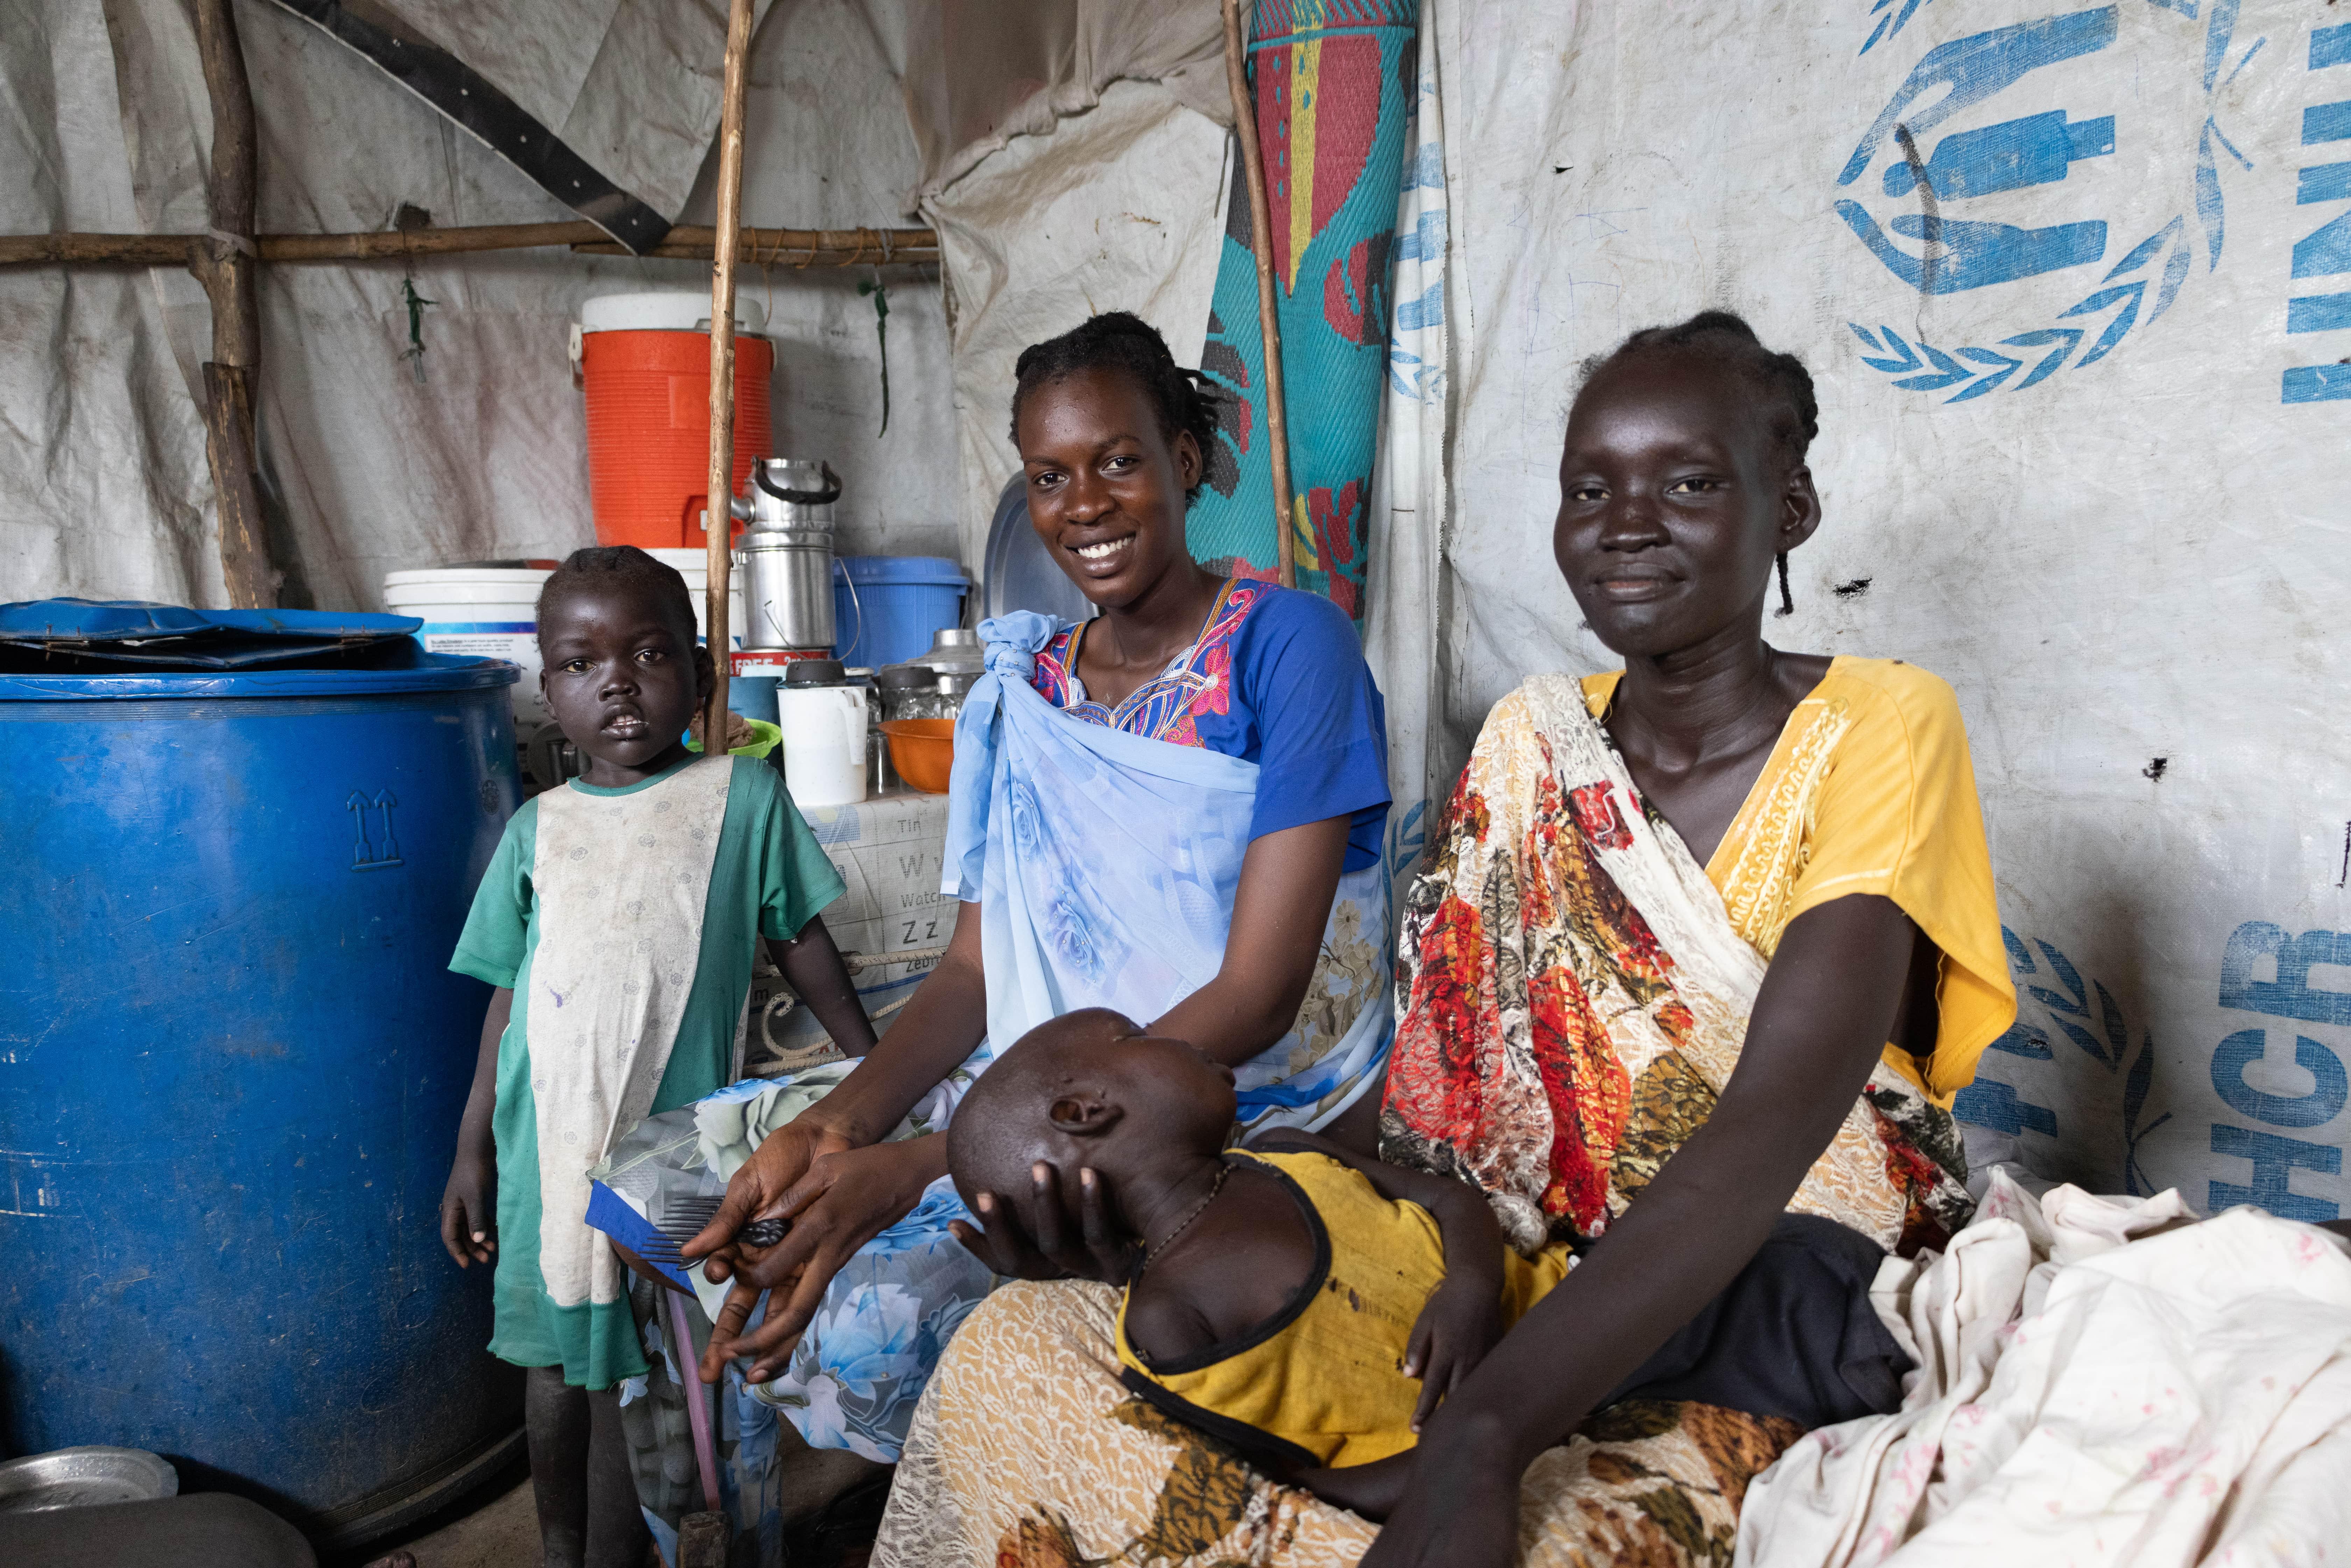 Sudan War & South Sudan Refugees: Nyachangjwok William Oguen arrived at the Protection of Civilians (PoC) site last April with her brother. Her child Zacharia Peter Dak (yellow shirt), four years old, is suffering from severe malnutrition.